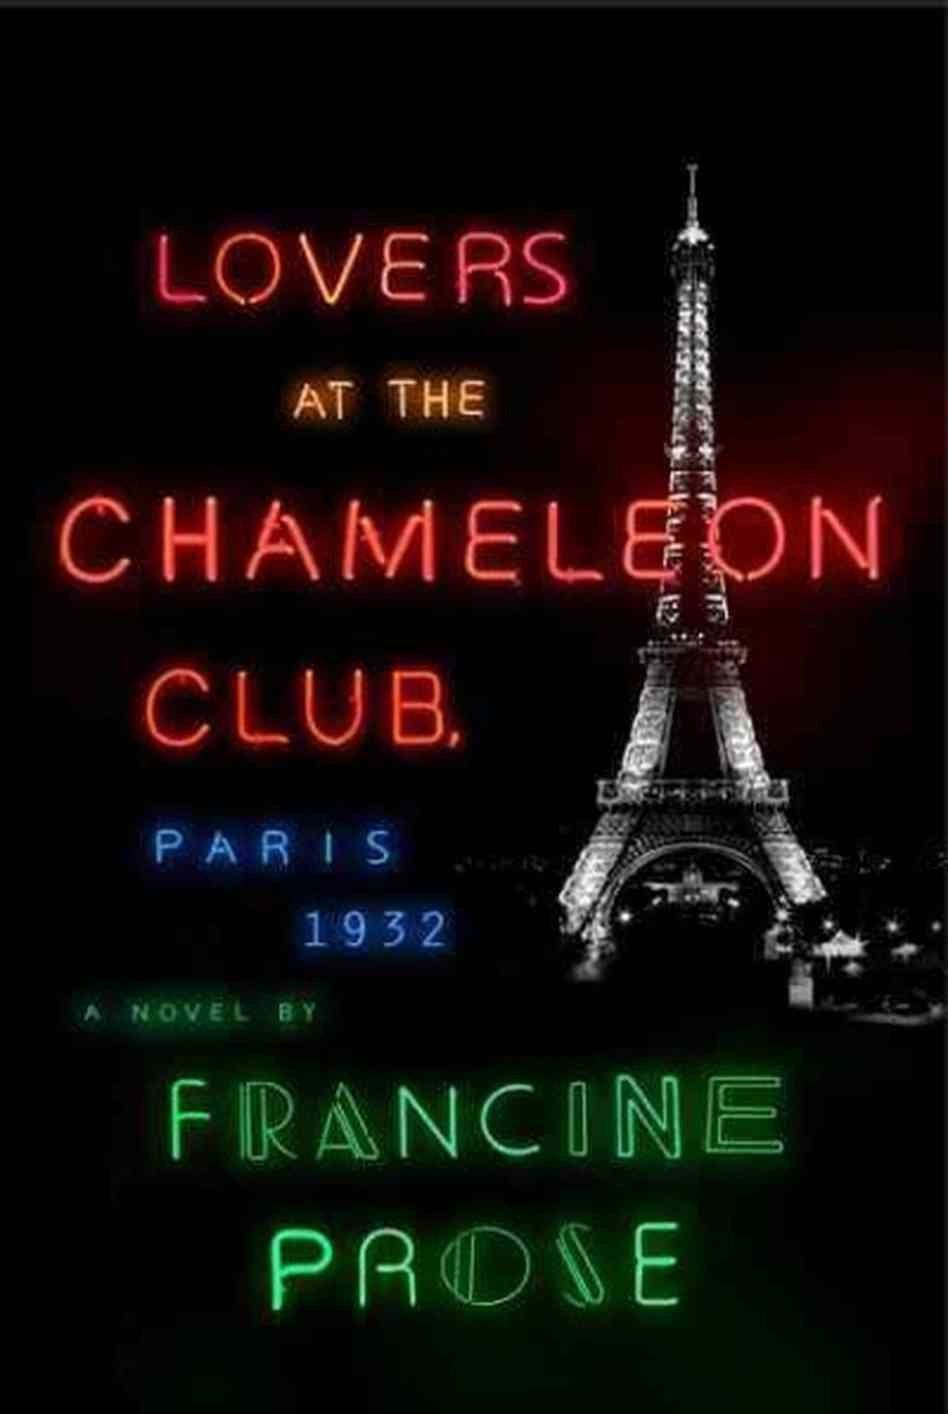 'Lovers at the Chameleon Club, Paris 1932' by Francine Prose